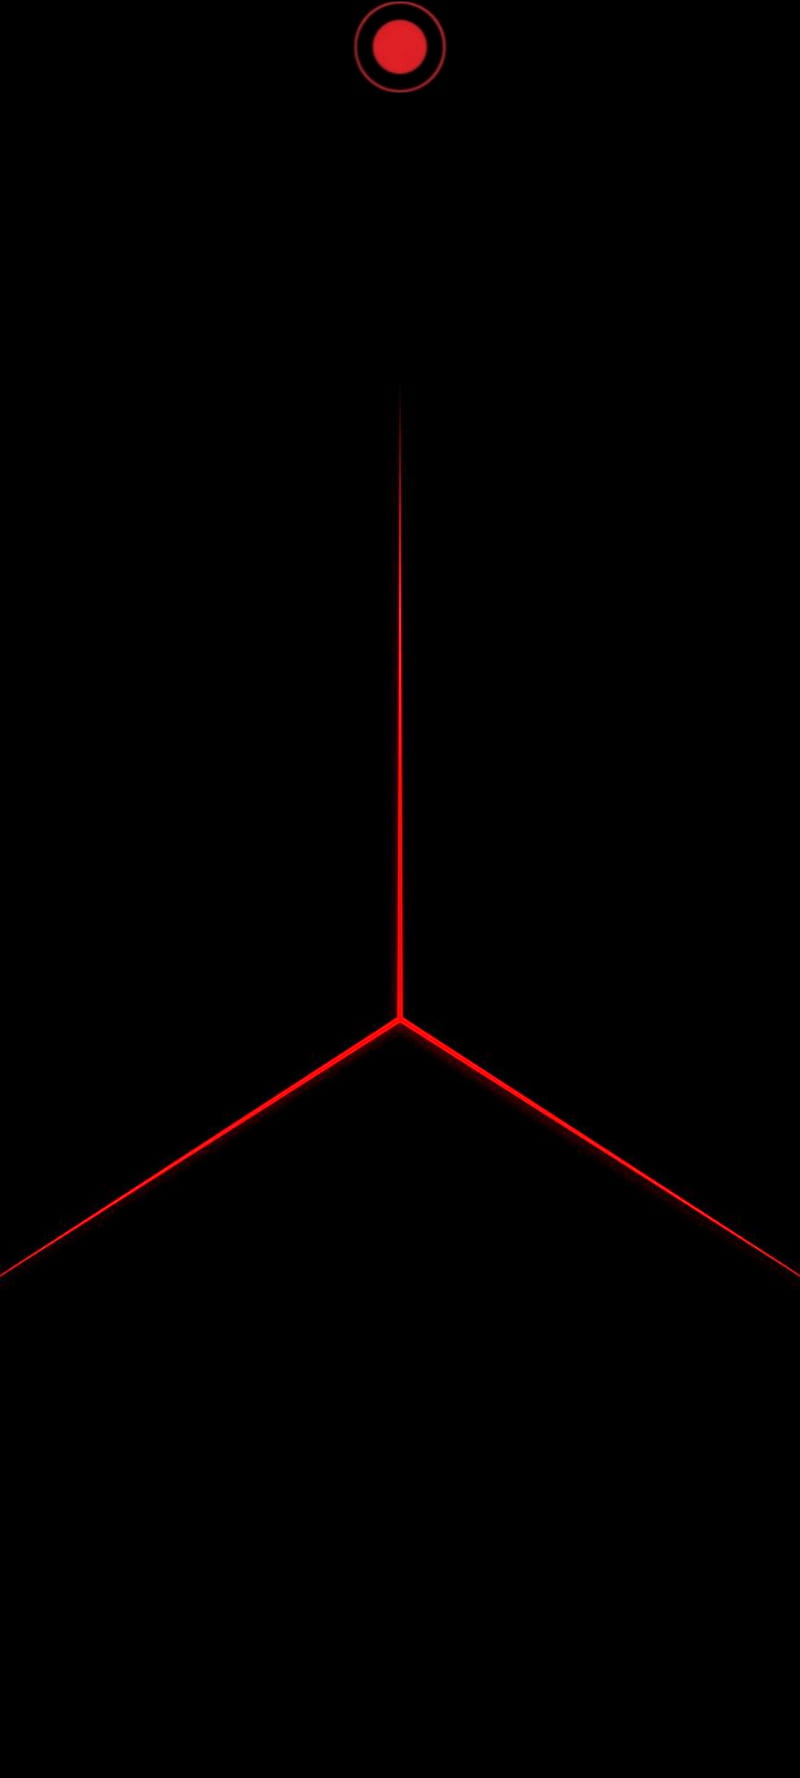 Punch hole, abstract, desenho, notch, red, HD phone wallpaper